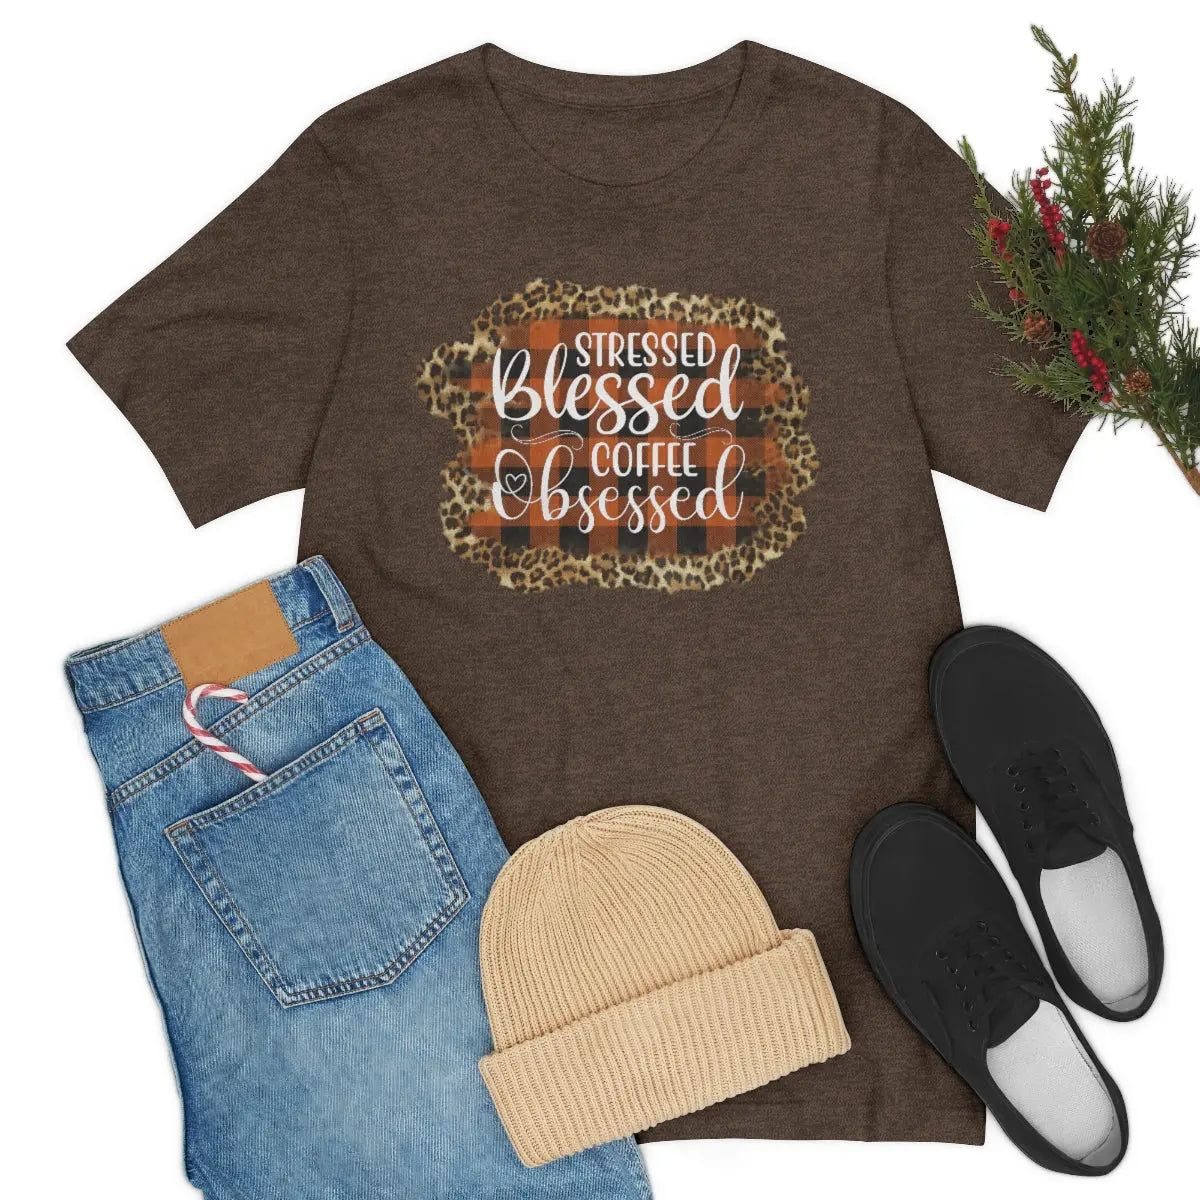 Stressed Blessed Coffee Obsessed Tee - Amazing Faith Designs